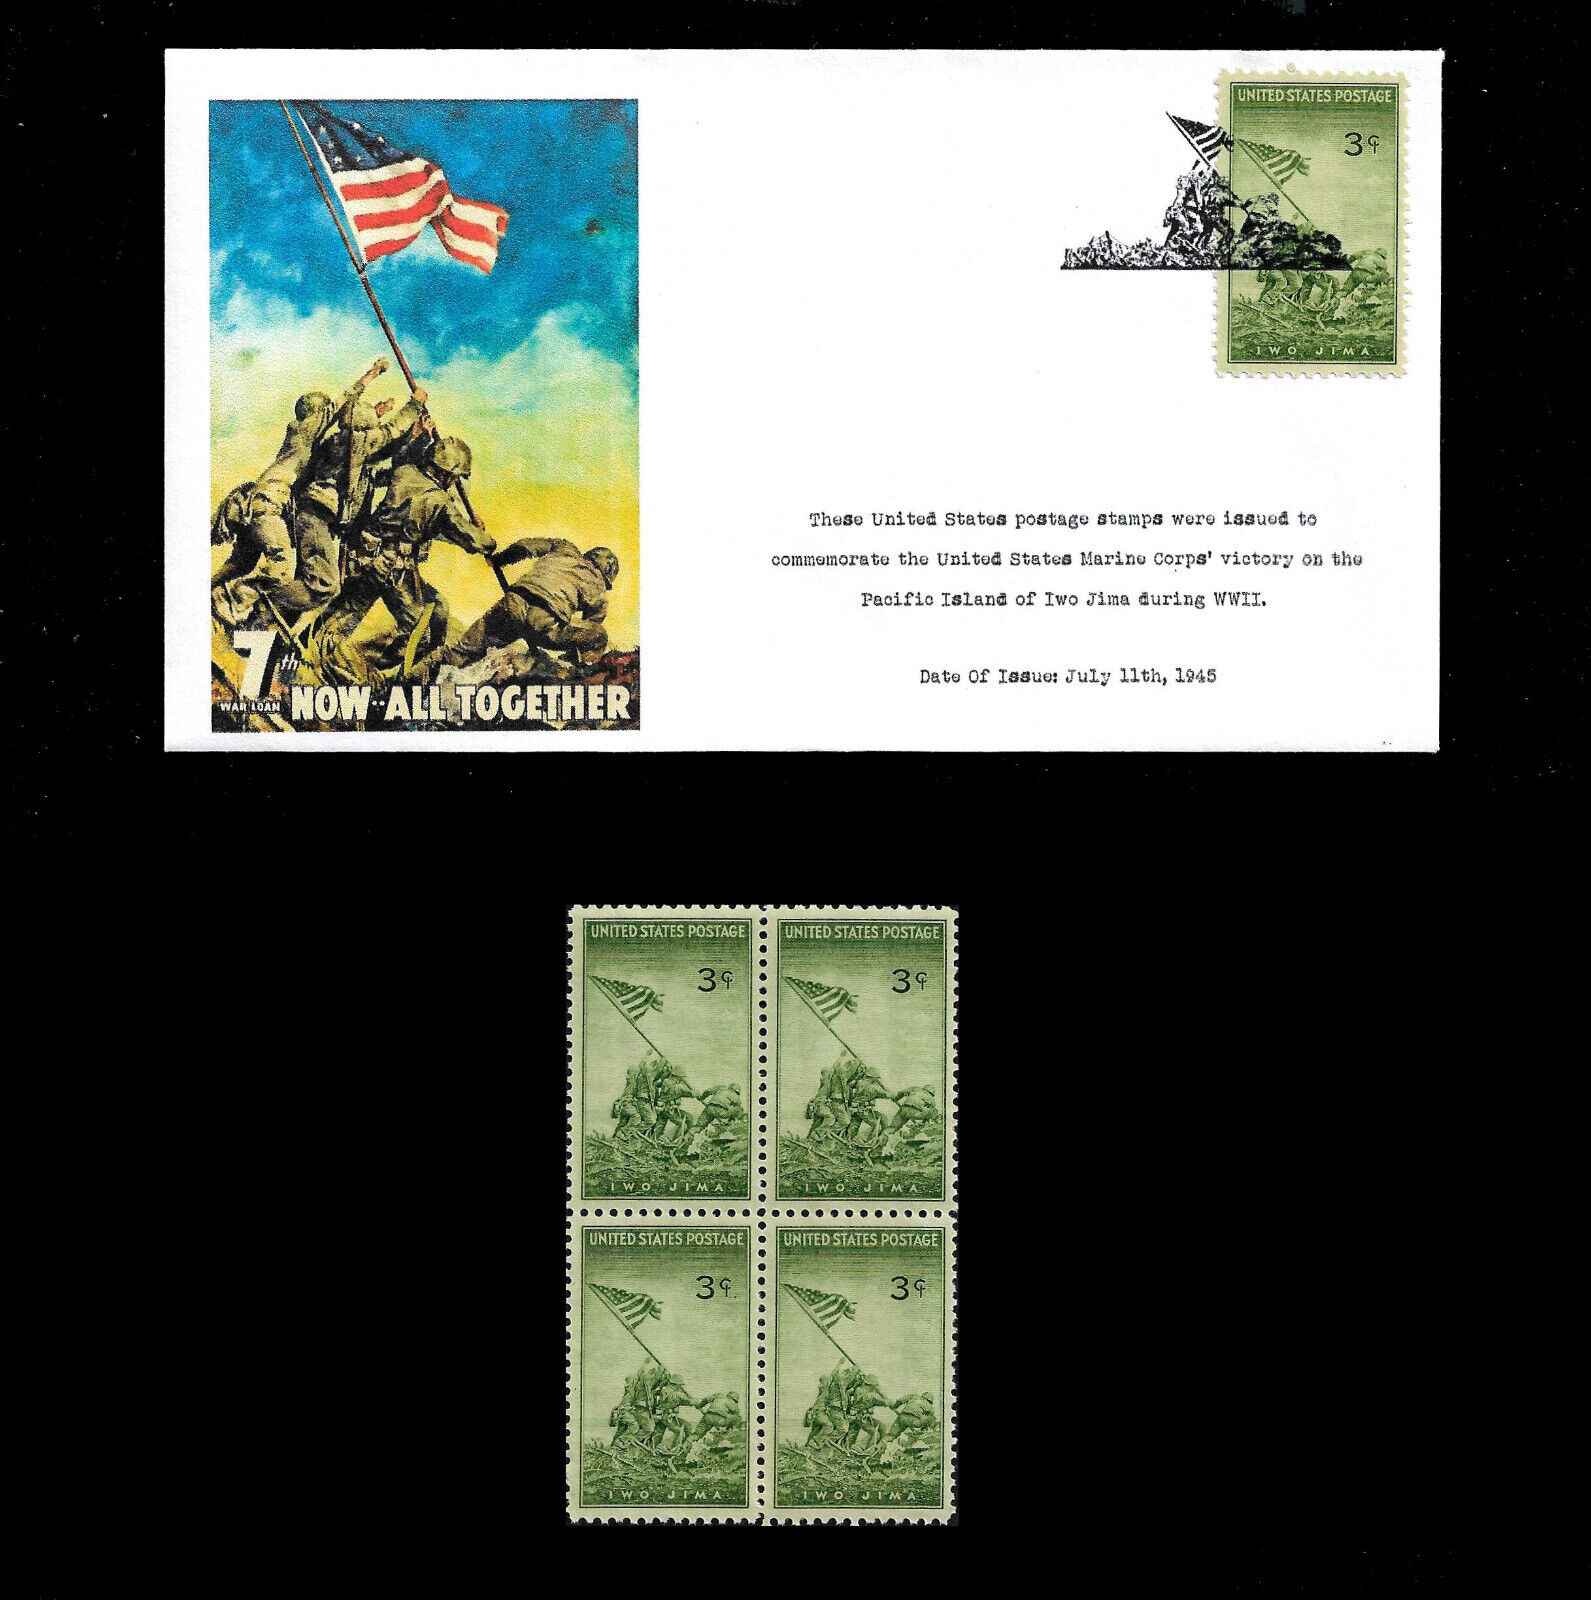 1945 U.S. Marines At Iwo Jima Postage Stamps Mint Post Office Fresh Condition